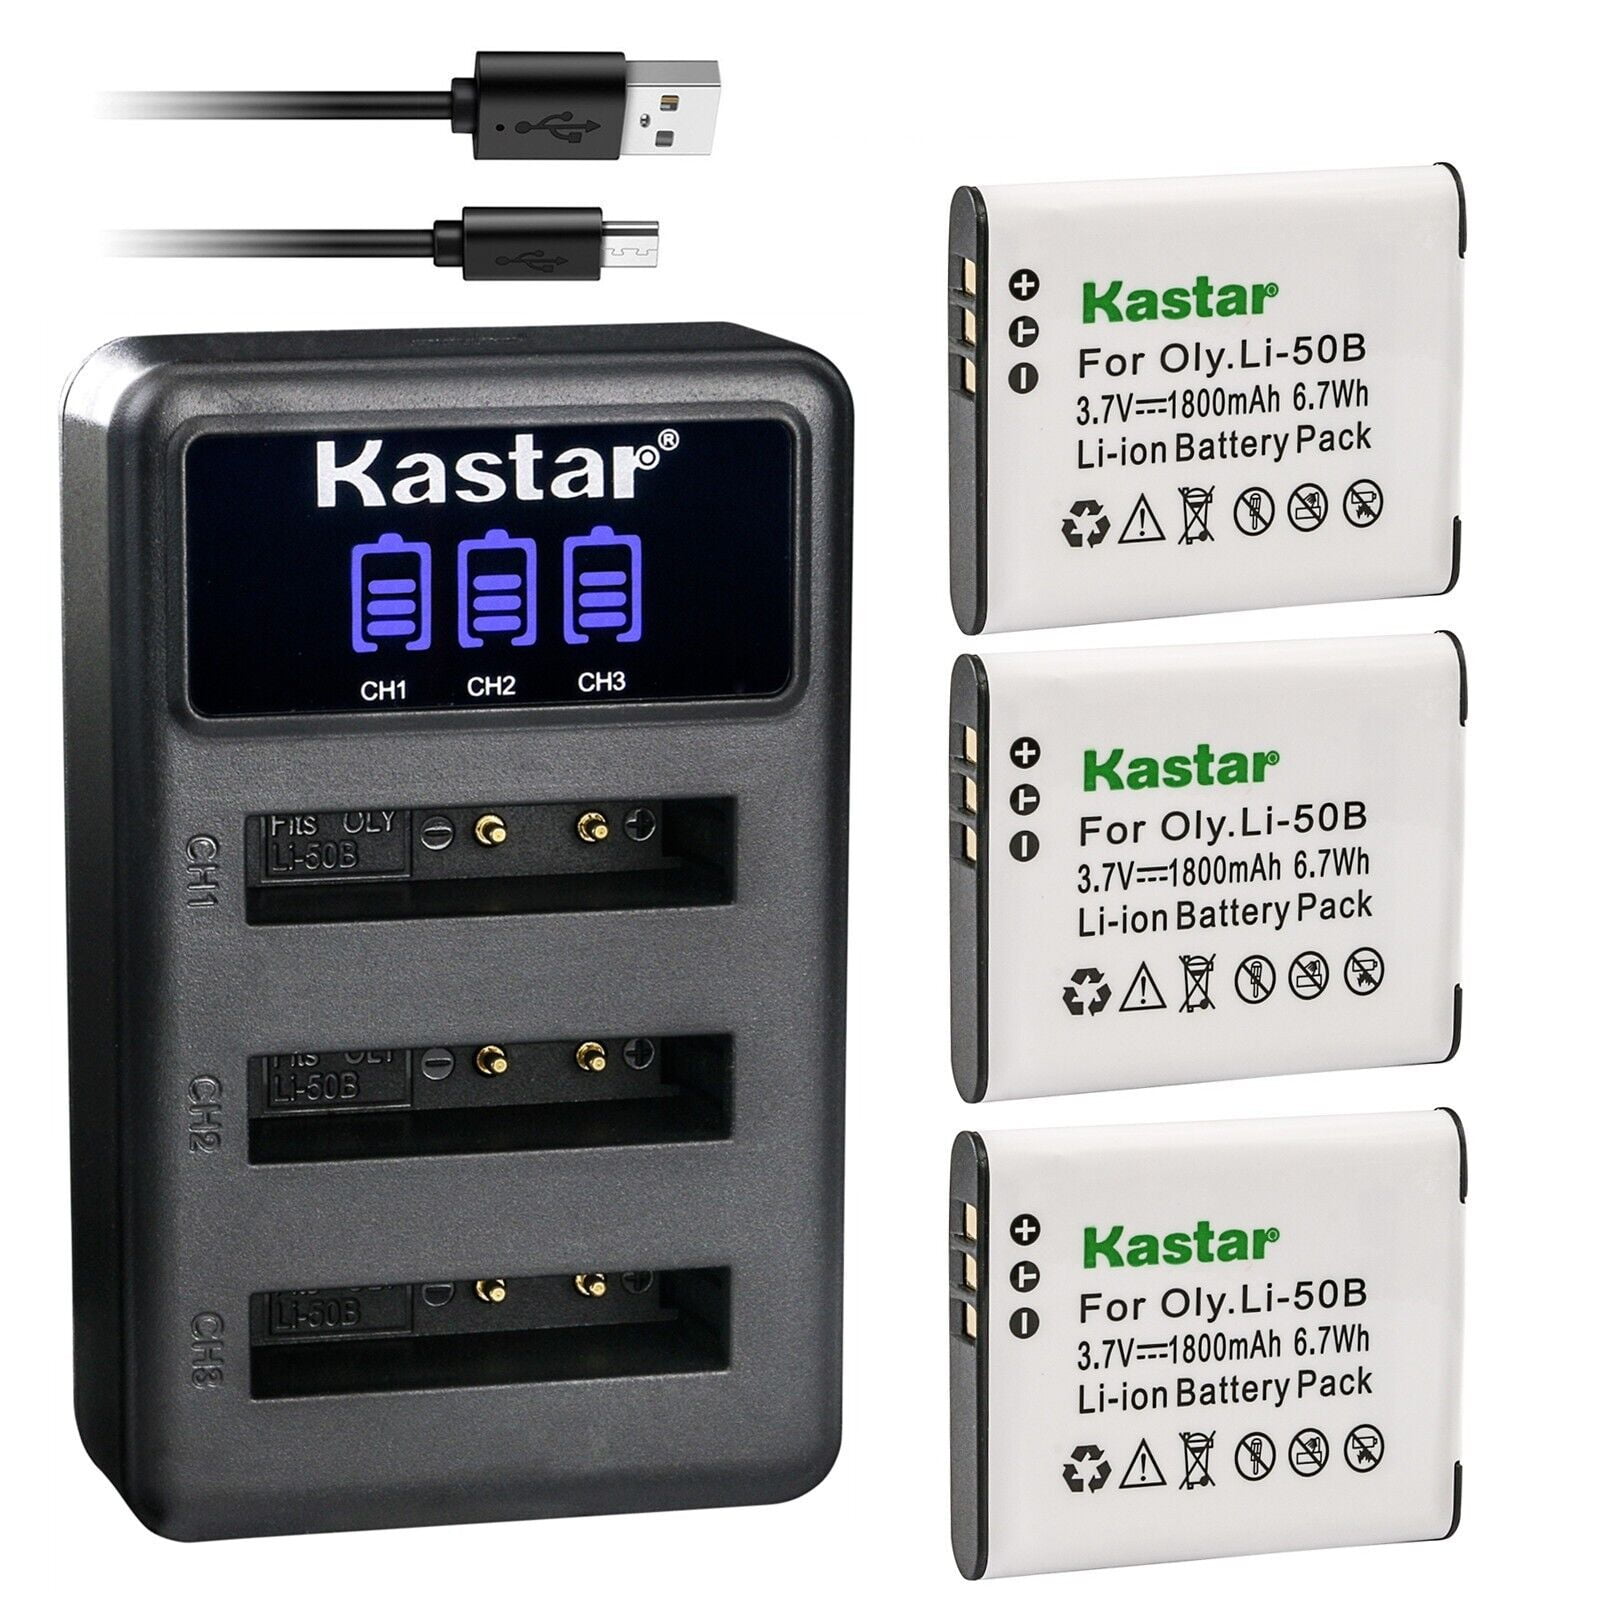 Piraat Melodrama Destructief Kastar 2 Pack Battery and LCD Triple USB Charger Compatible with Casio  NP-150, Exilim EX-TR60, Exilim EX-TR600, Exilim EX-TR10, Exilim EX-TR10BE,  Exilim EX-TR10SP, Exilim EX-TR10WE, Exilim EX-TR100 - Walmart.com